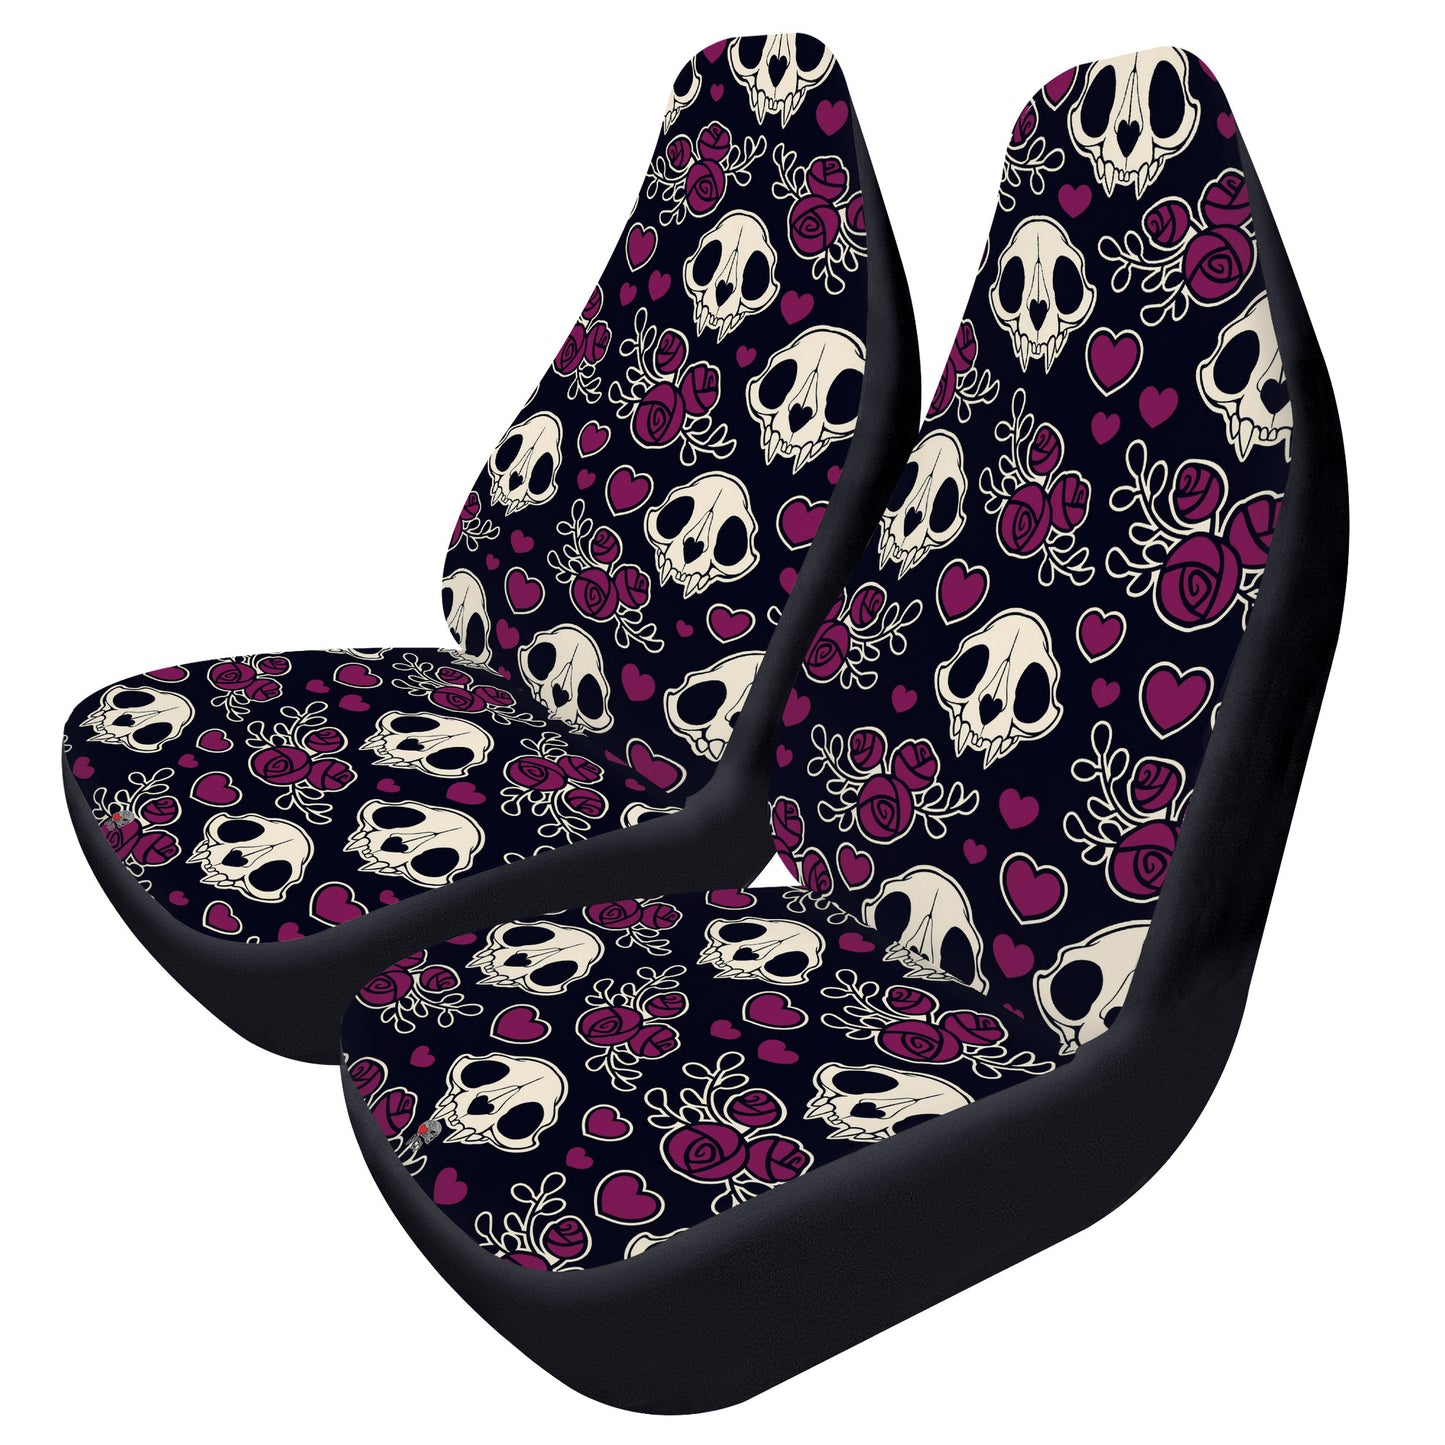 Beloved Car Seat Covers